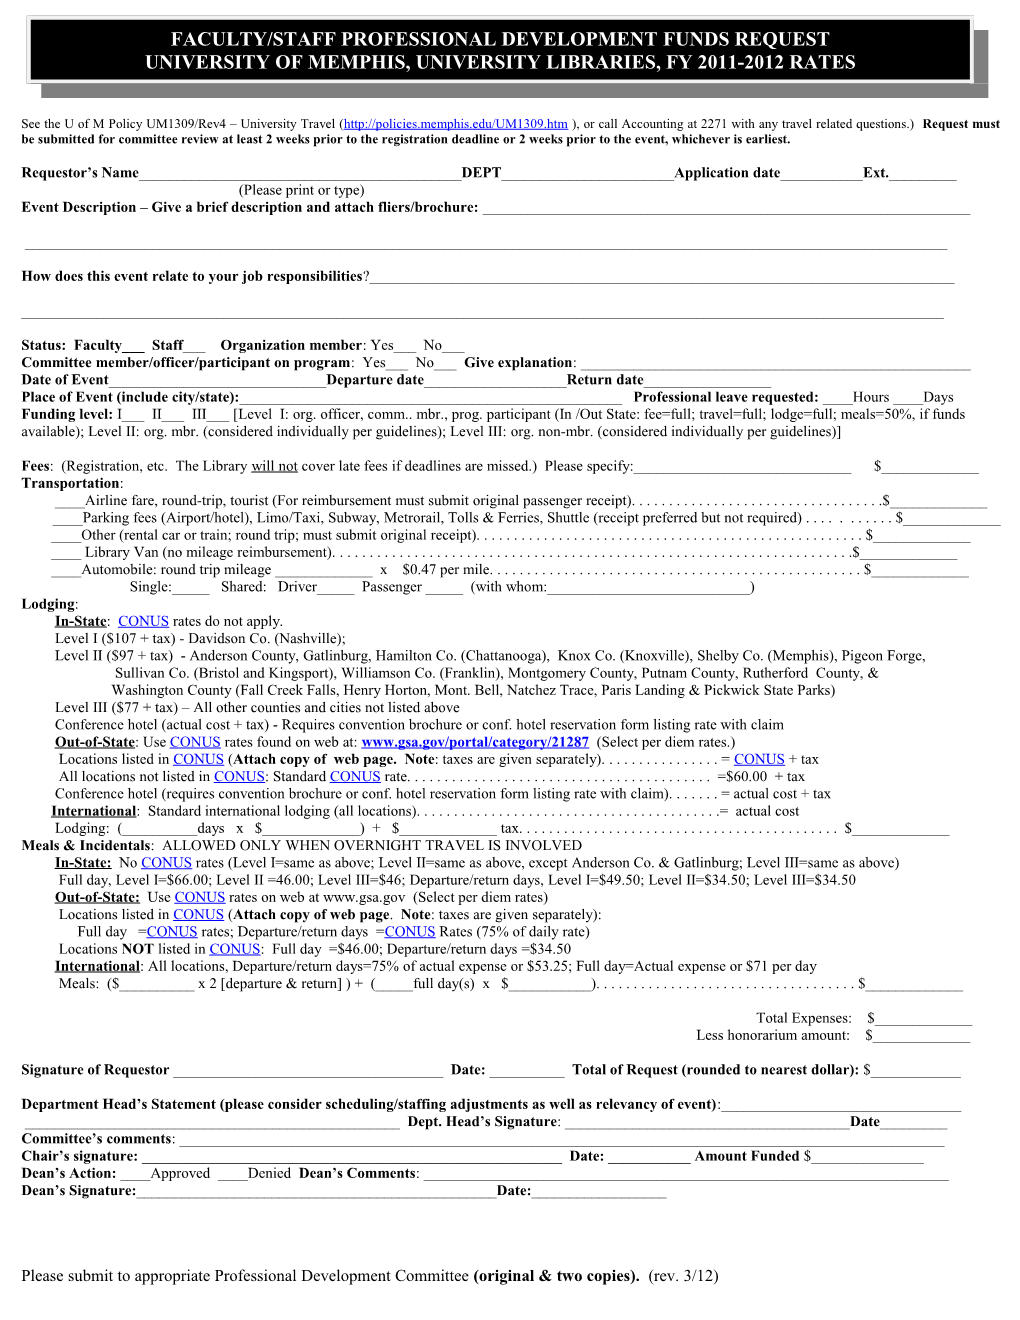 Application for Travel Funds, University of Memphis Libraries